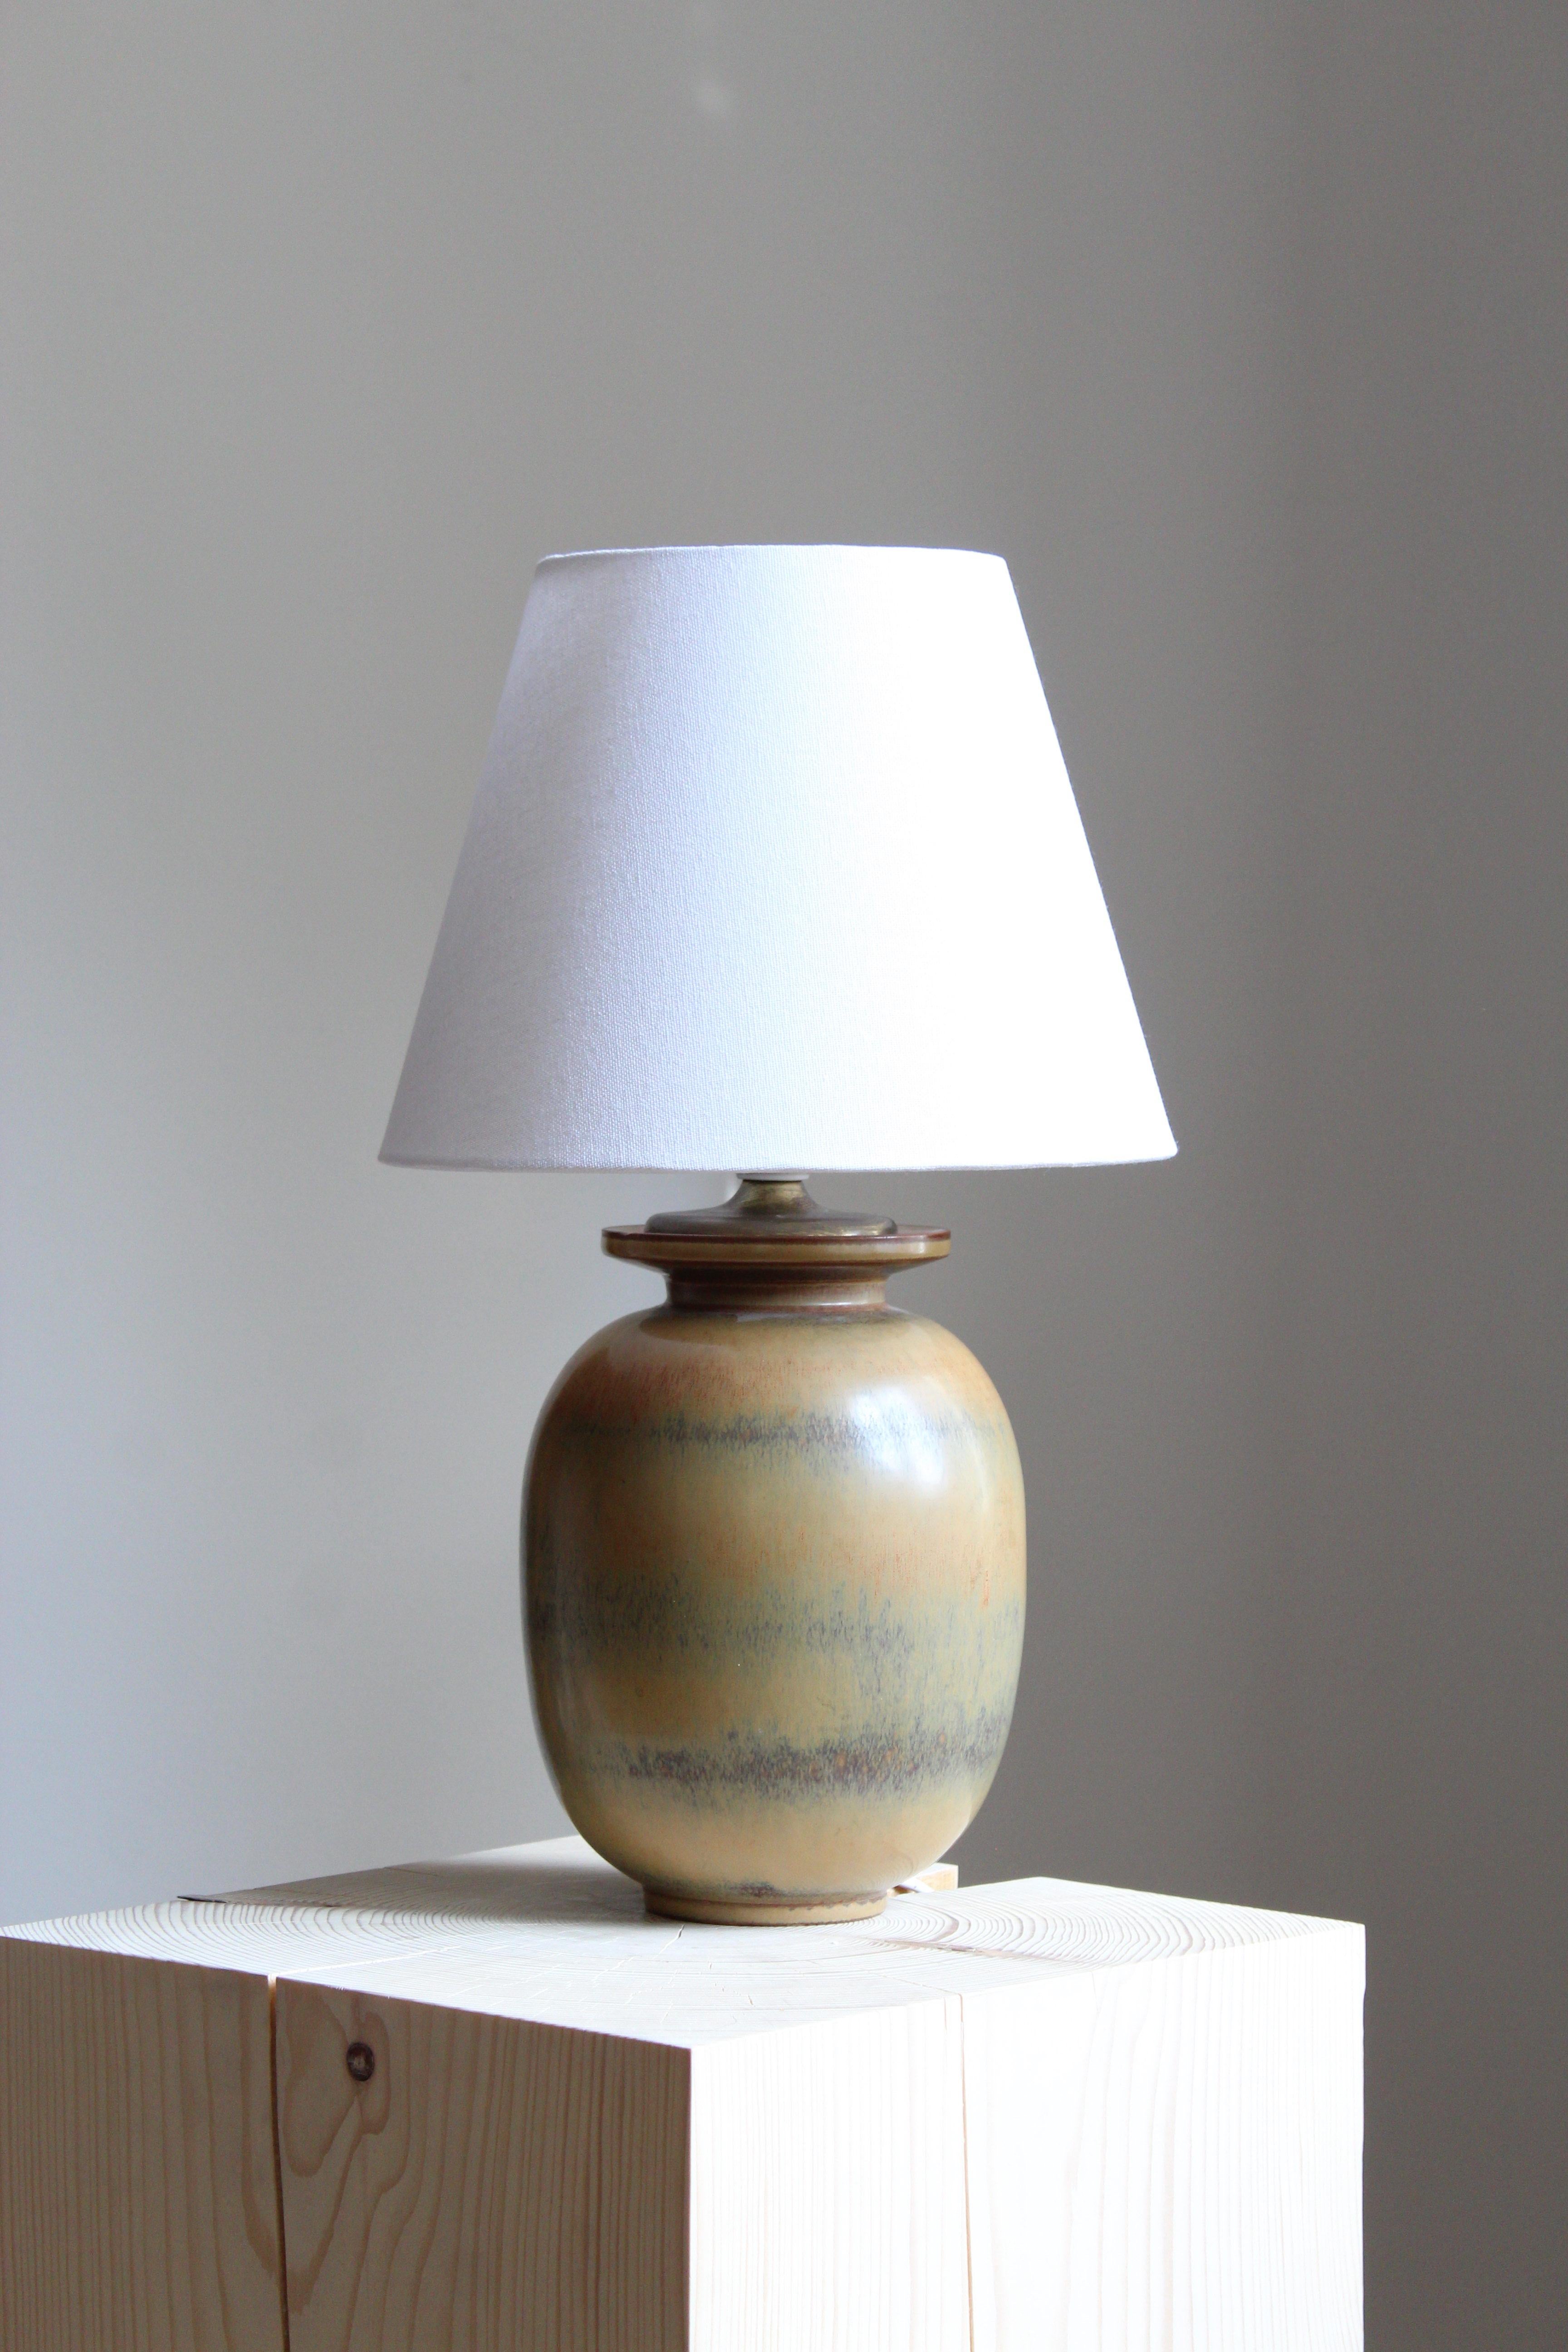 A table lamp produced by Rörstrand, Sweden, 1940s. Designed and signed by Gunnar Nylund, (Swedish, 1914-1997). Factory second

Nylund served as artistic director at Rörstrand, where he worked, 1931-1955. Prior to his work at Rörstrand he was a